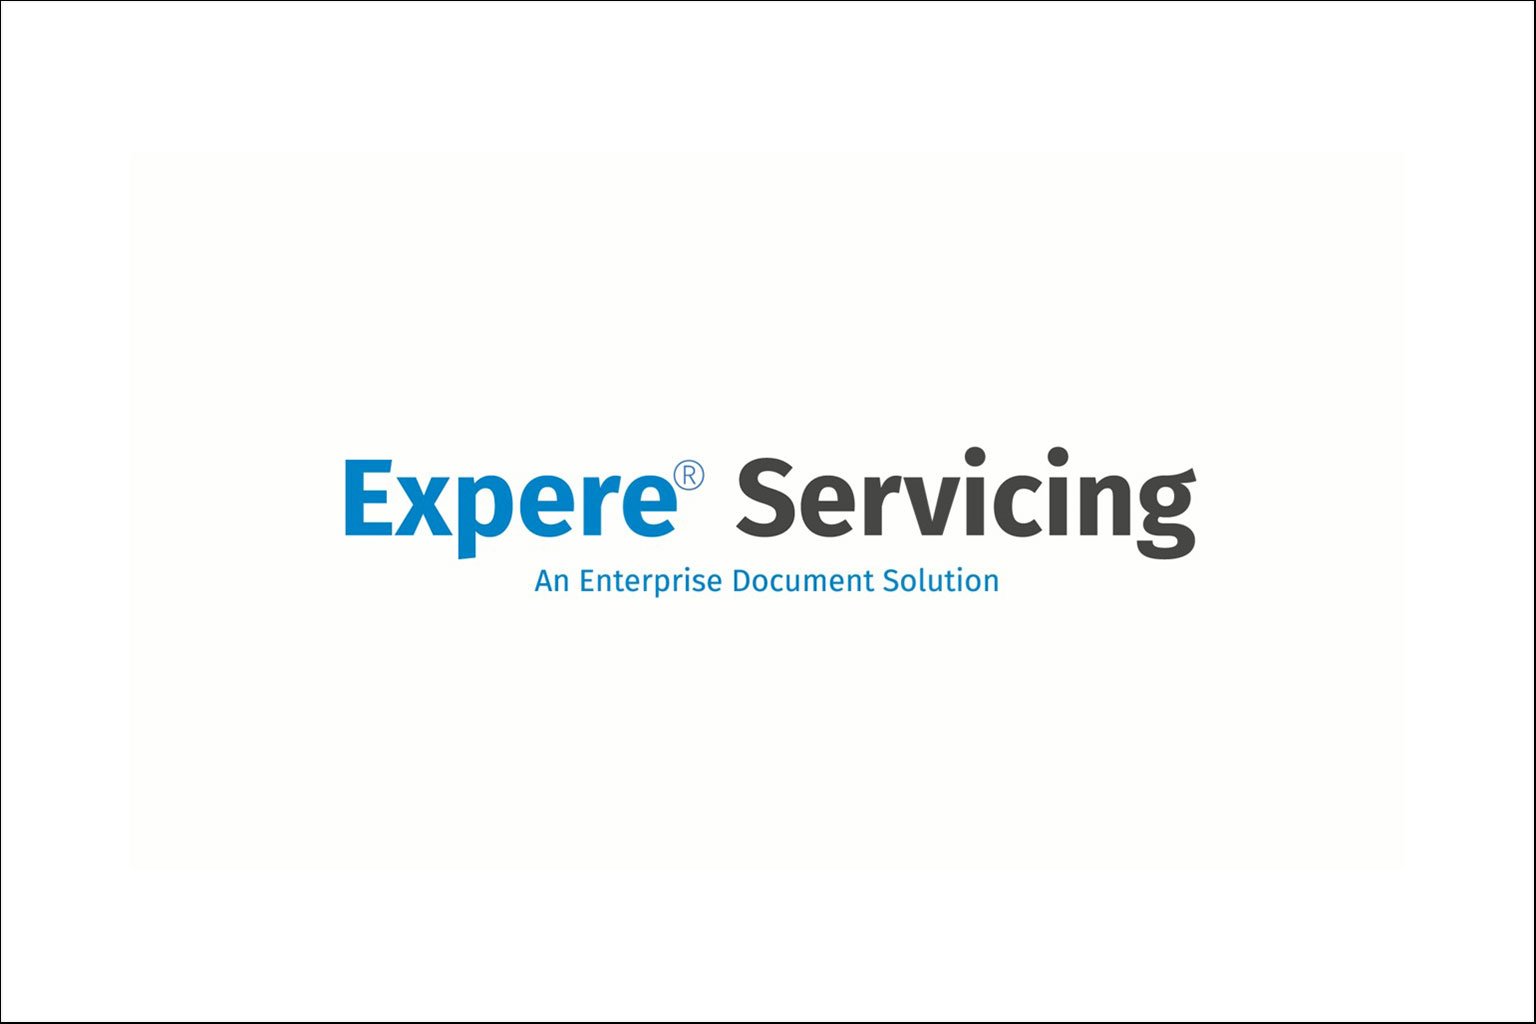 Expere Servicing